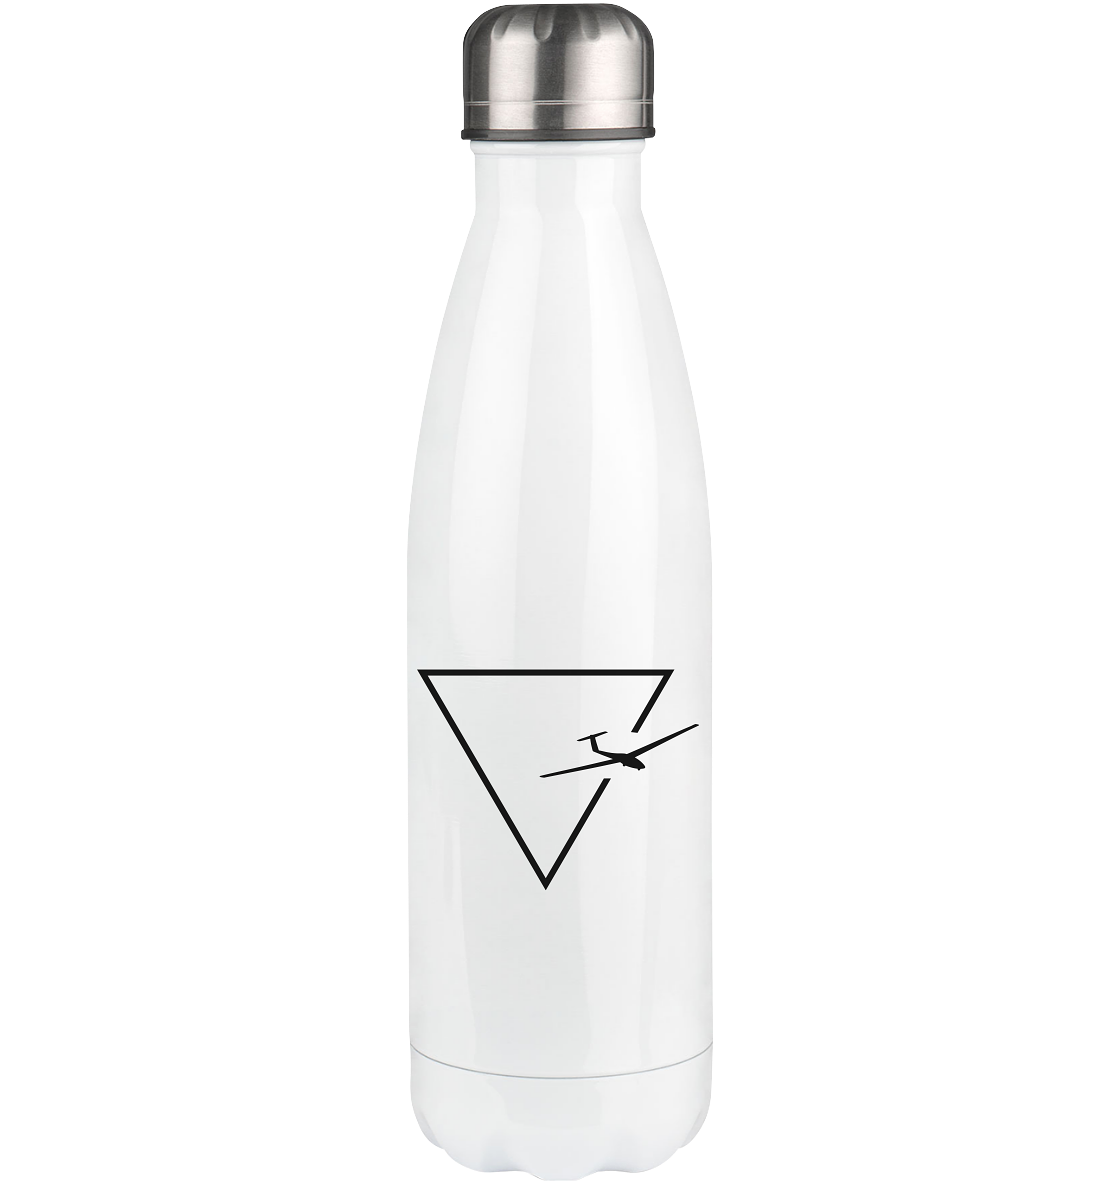 Triangle 1 and Sailplane - Edelstahl Thermosflasche berge 500ml